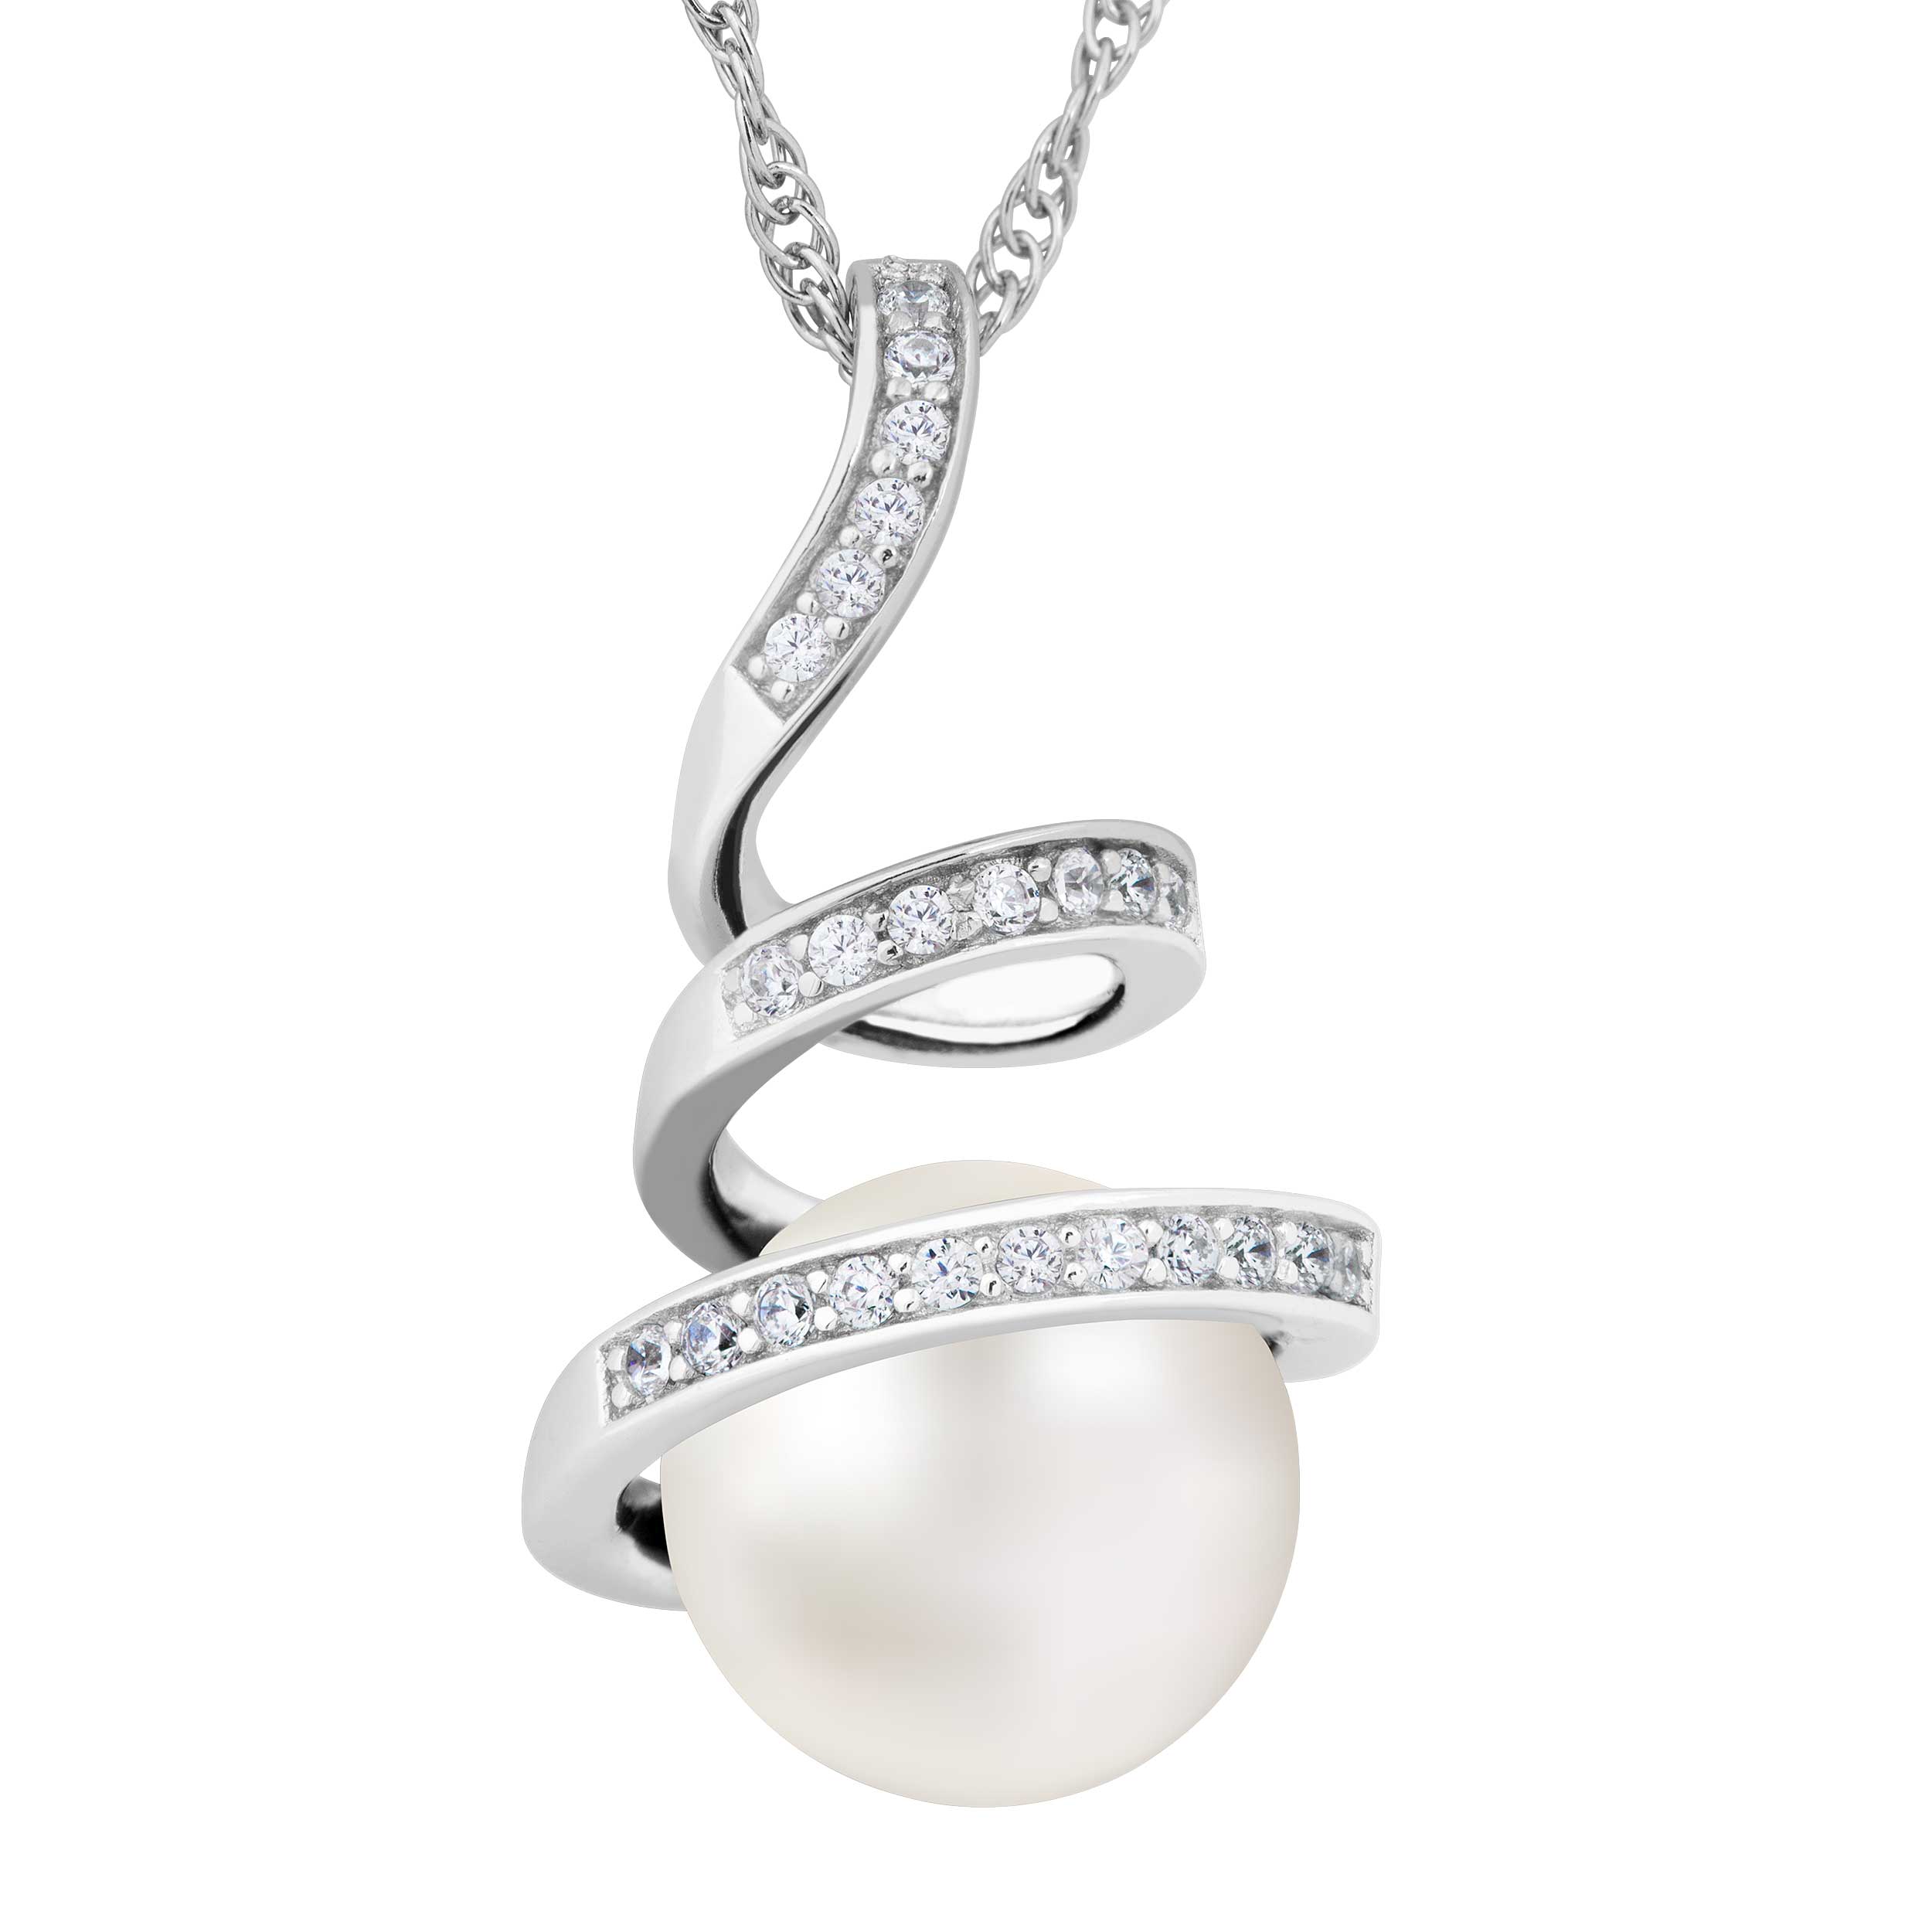  White Pearl Pendant Necklace, Rhodium Plated Sterling Silver